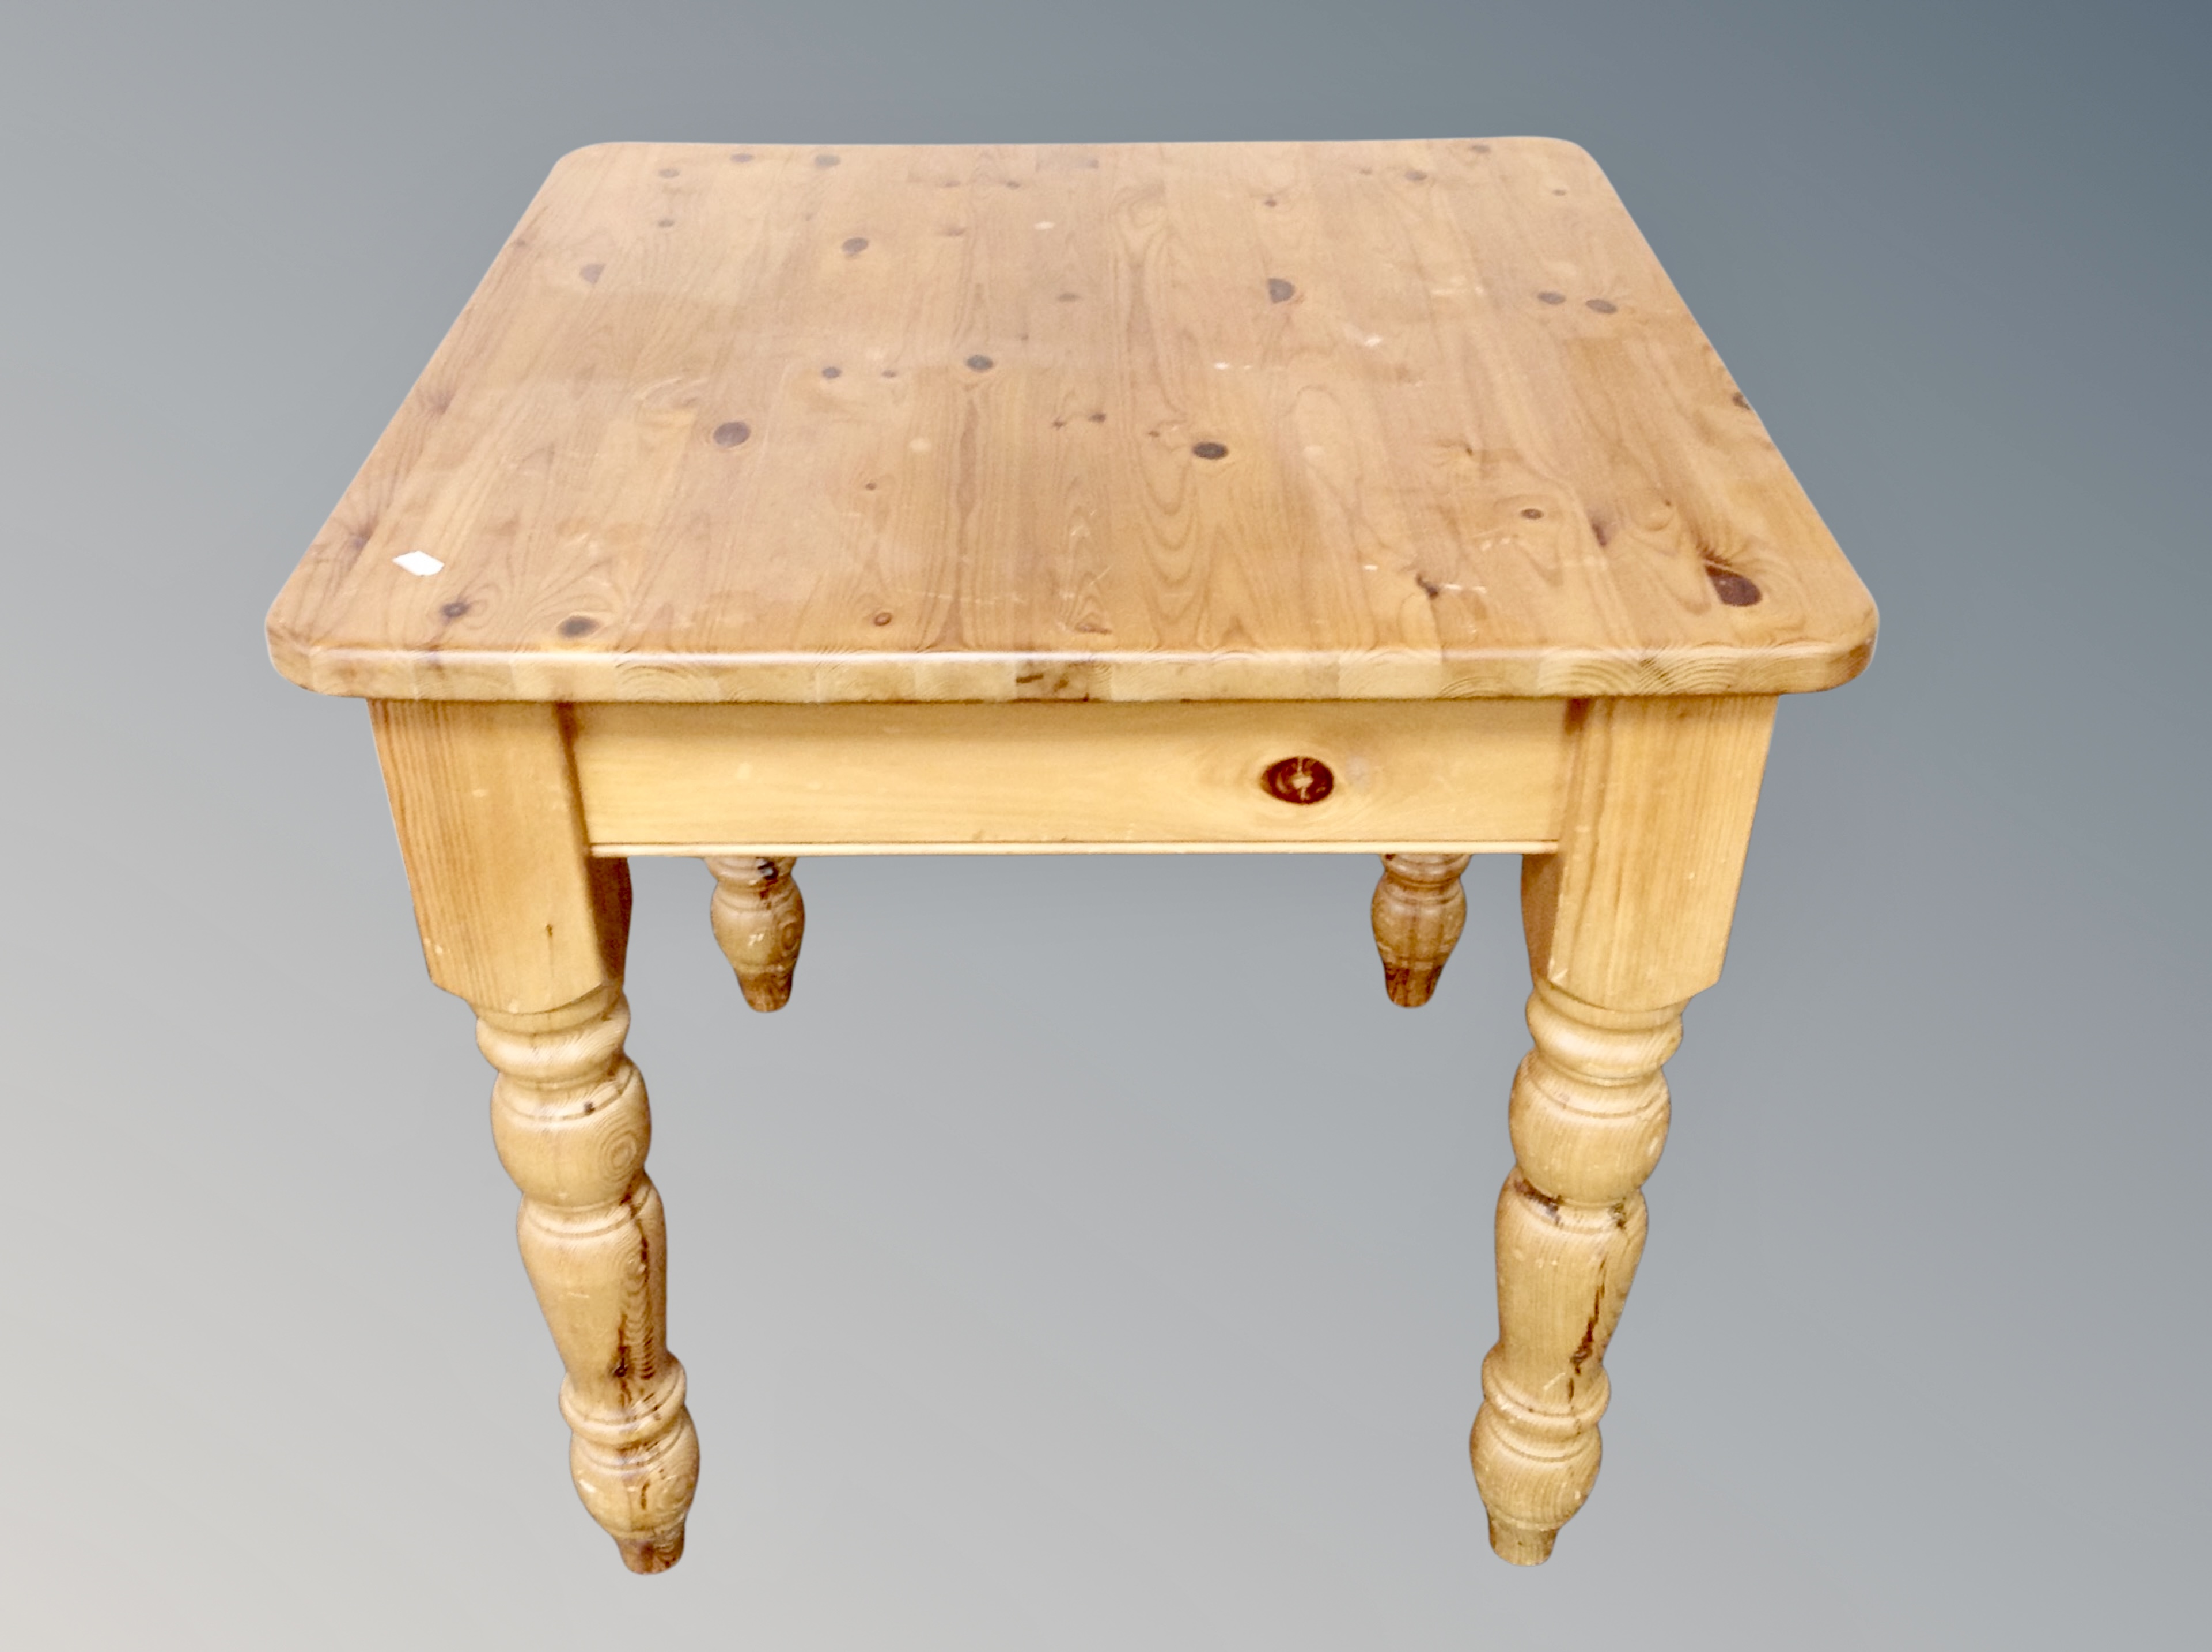 A square pine dining table and a set of four pine chairs